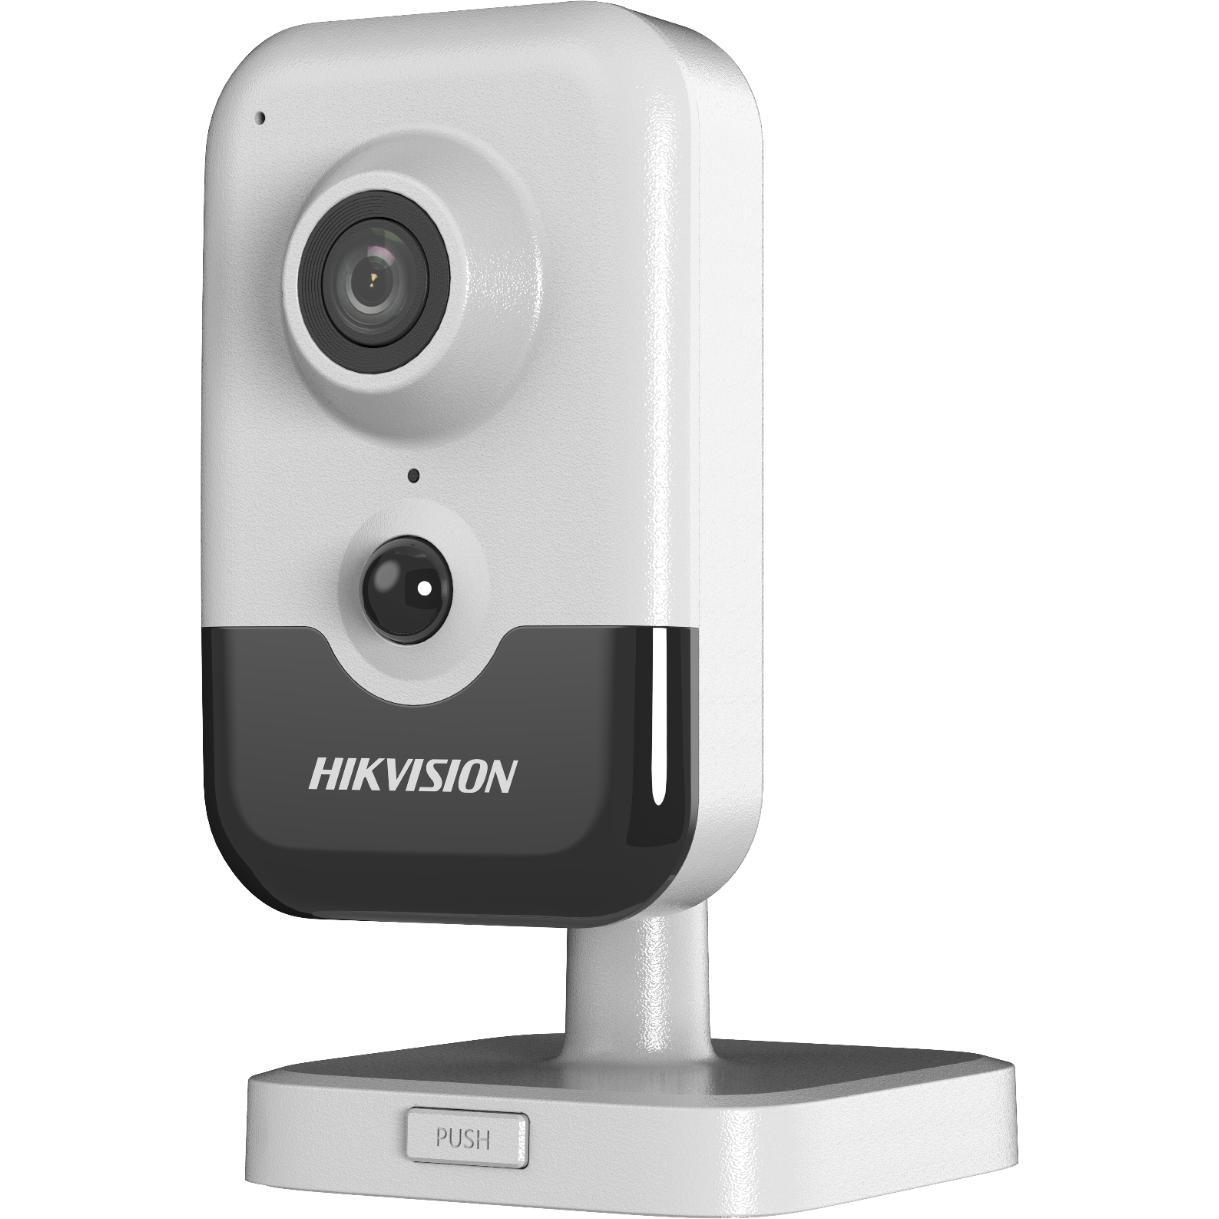 Hikvision DS-2CD2423G0-IW(2.8mm)(W) 2Мп компактная IP-камера с W-Fi и EXIR-подсветкой до 10м 1/2.8" - фото 1 - id-p222074260